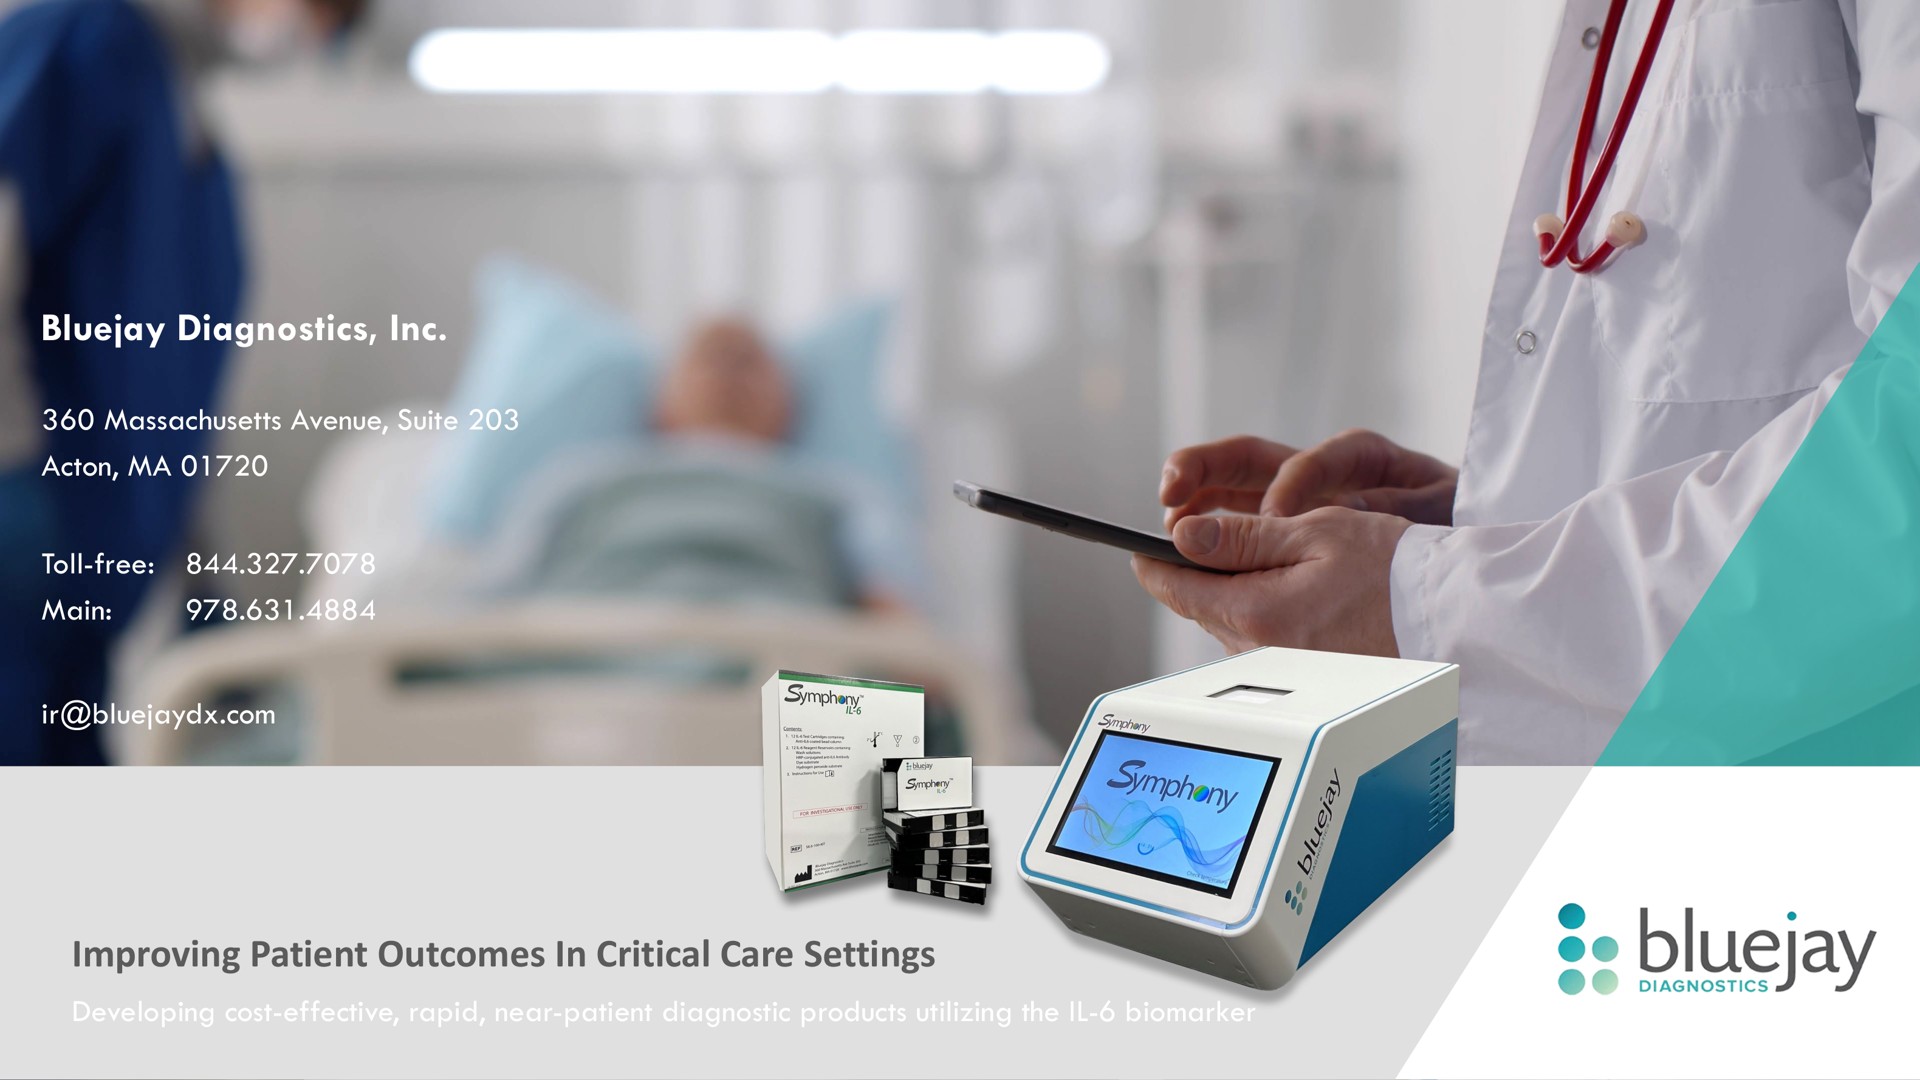 diagnostics improving patient outcomes in critical care settings | Bluejay